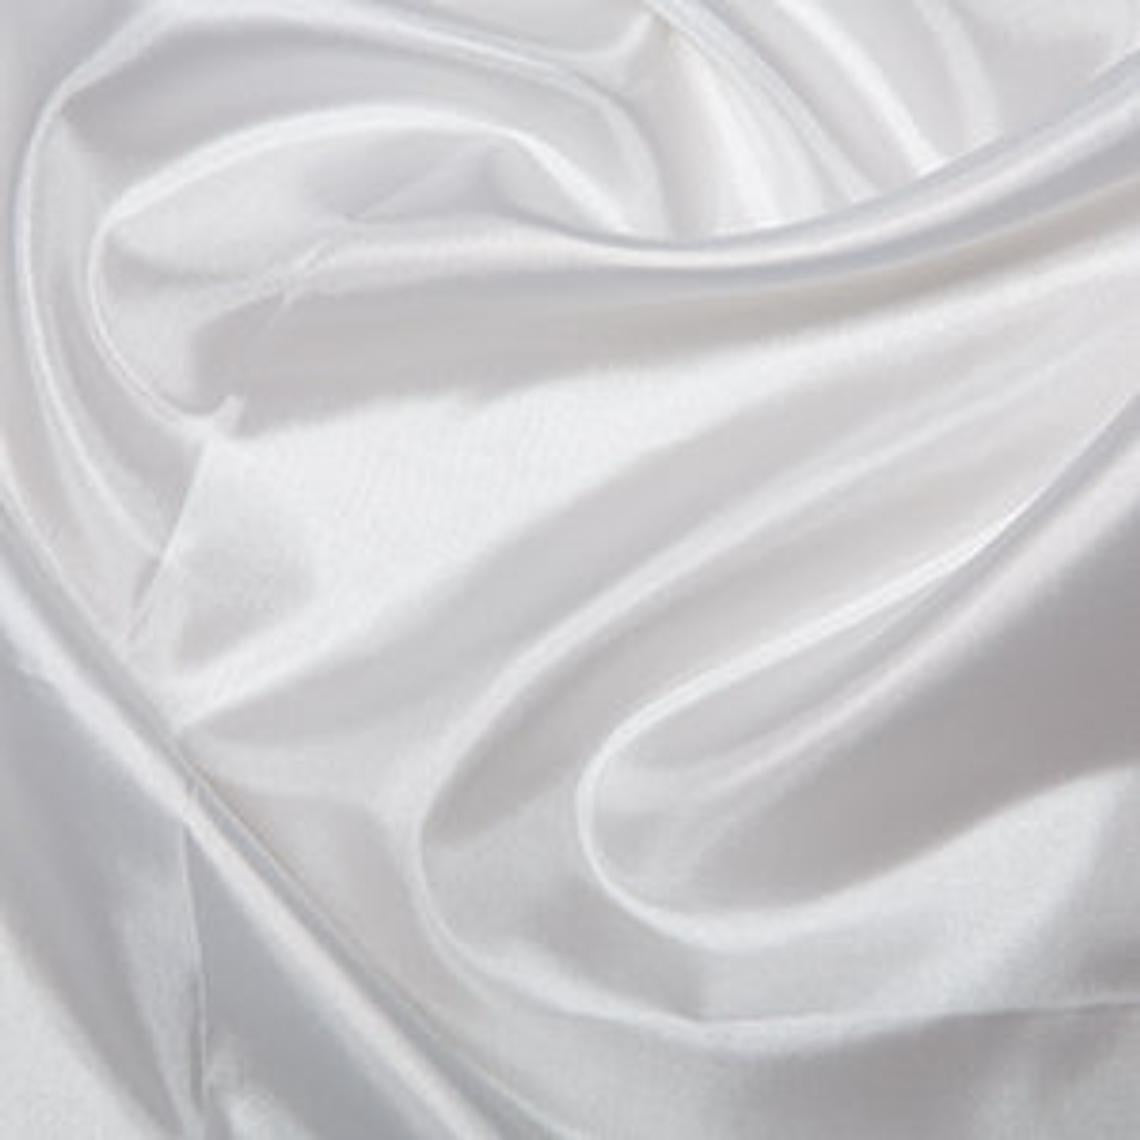 White Silk Polyester Habotai Lining Clothes Dresses 58" Wide Fabric Smooth Lustrous Lightweight Material 5 Metres